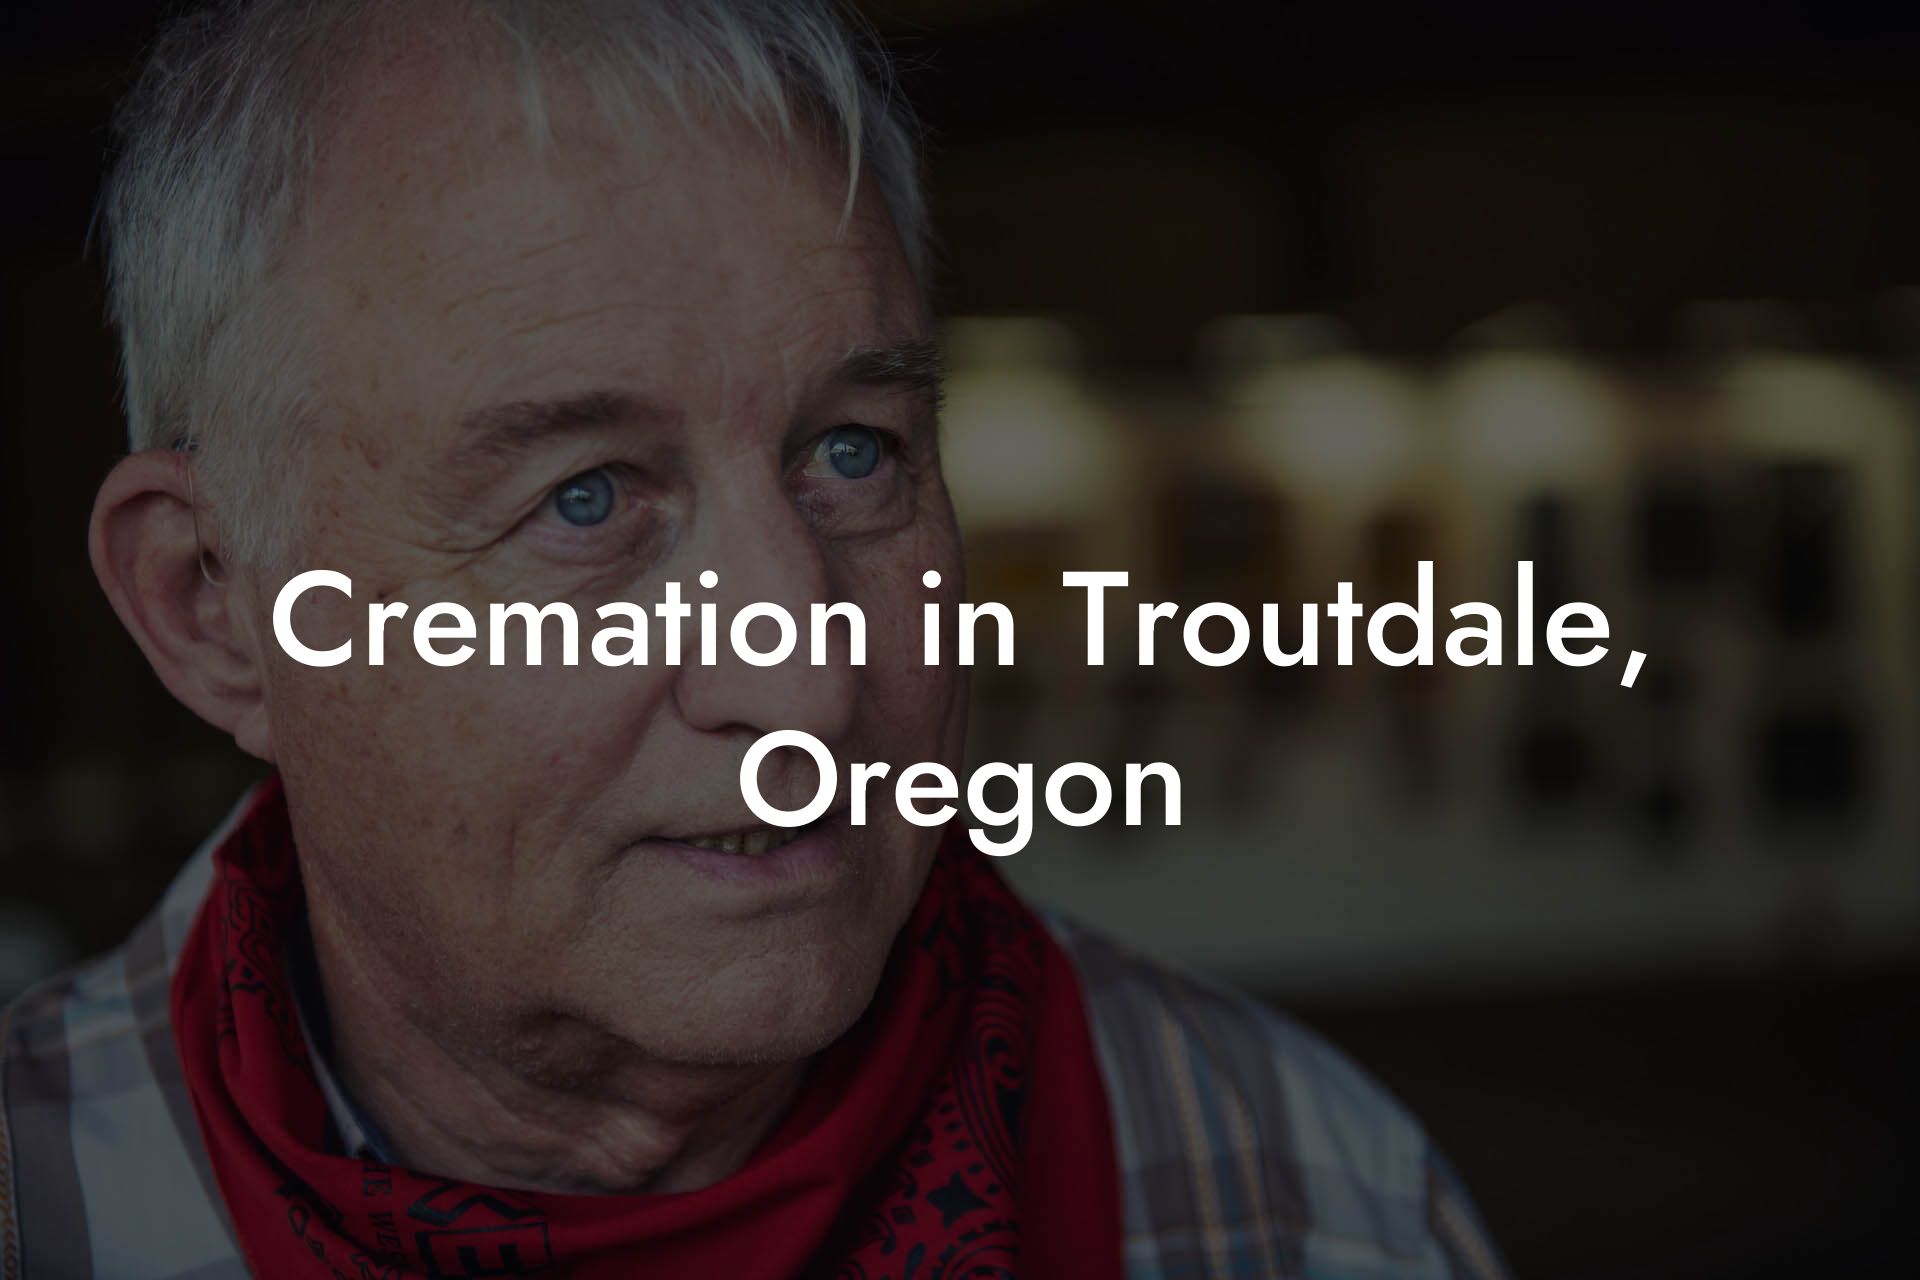 Cremation in Troutdale, Oregon